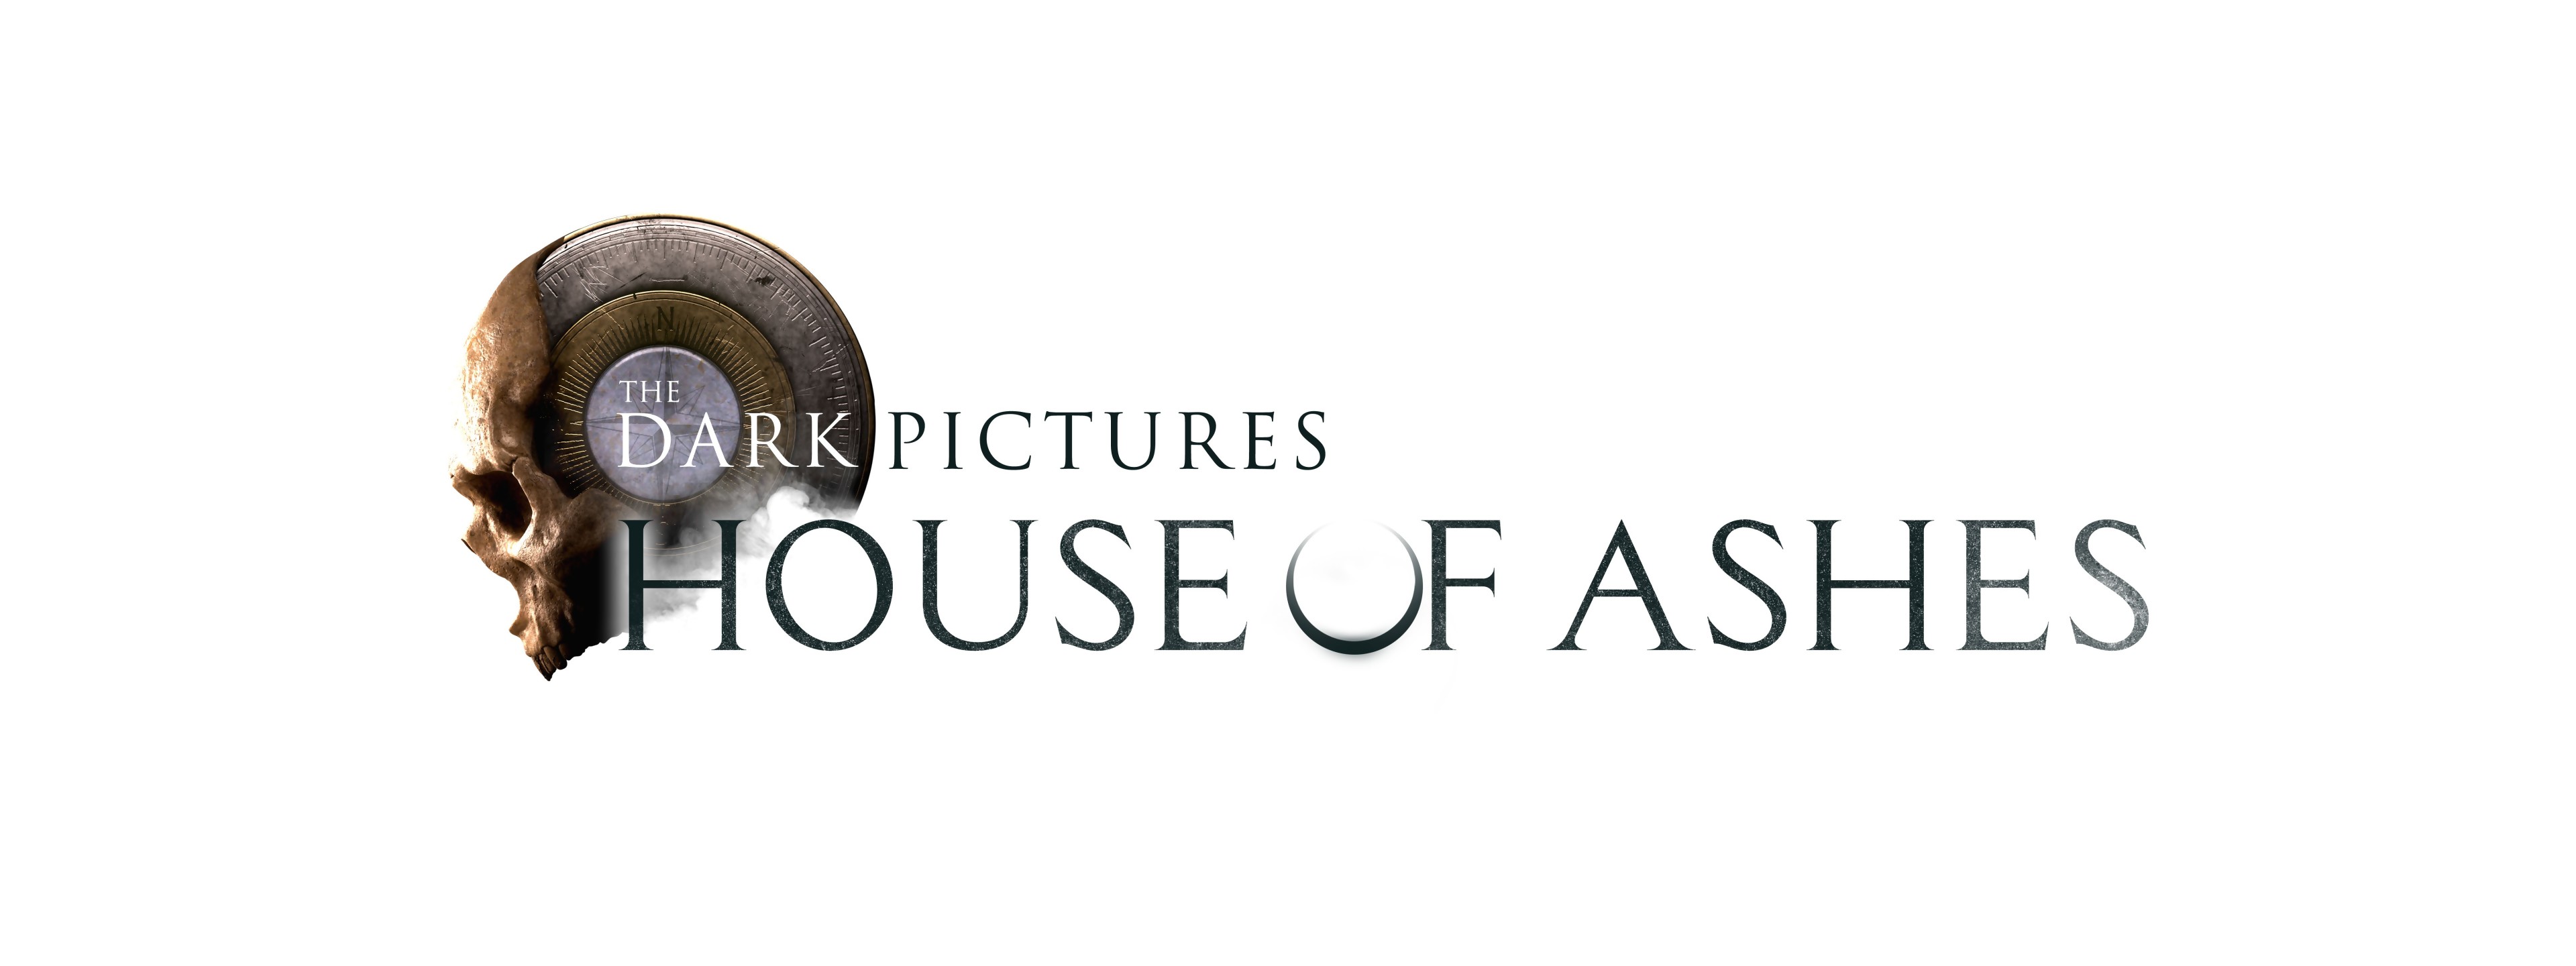 House of ashes стим фото 33